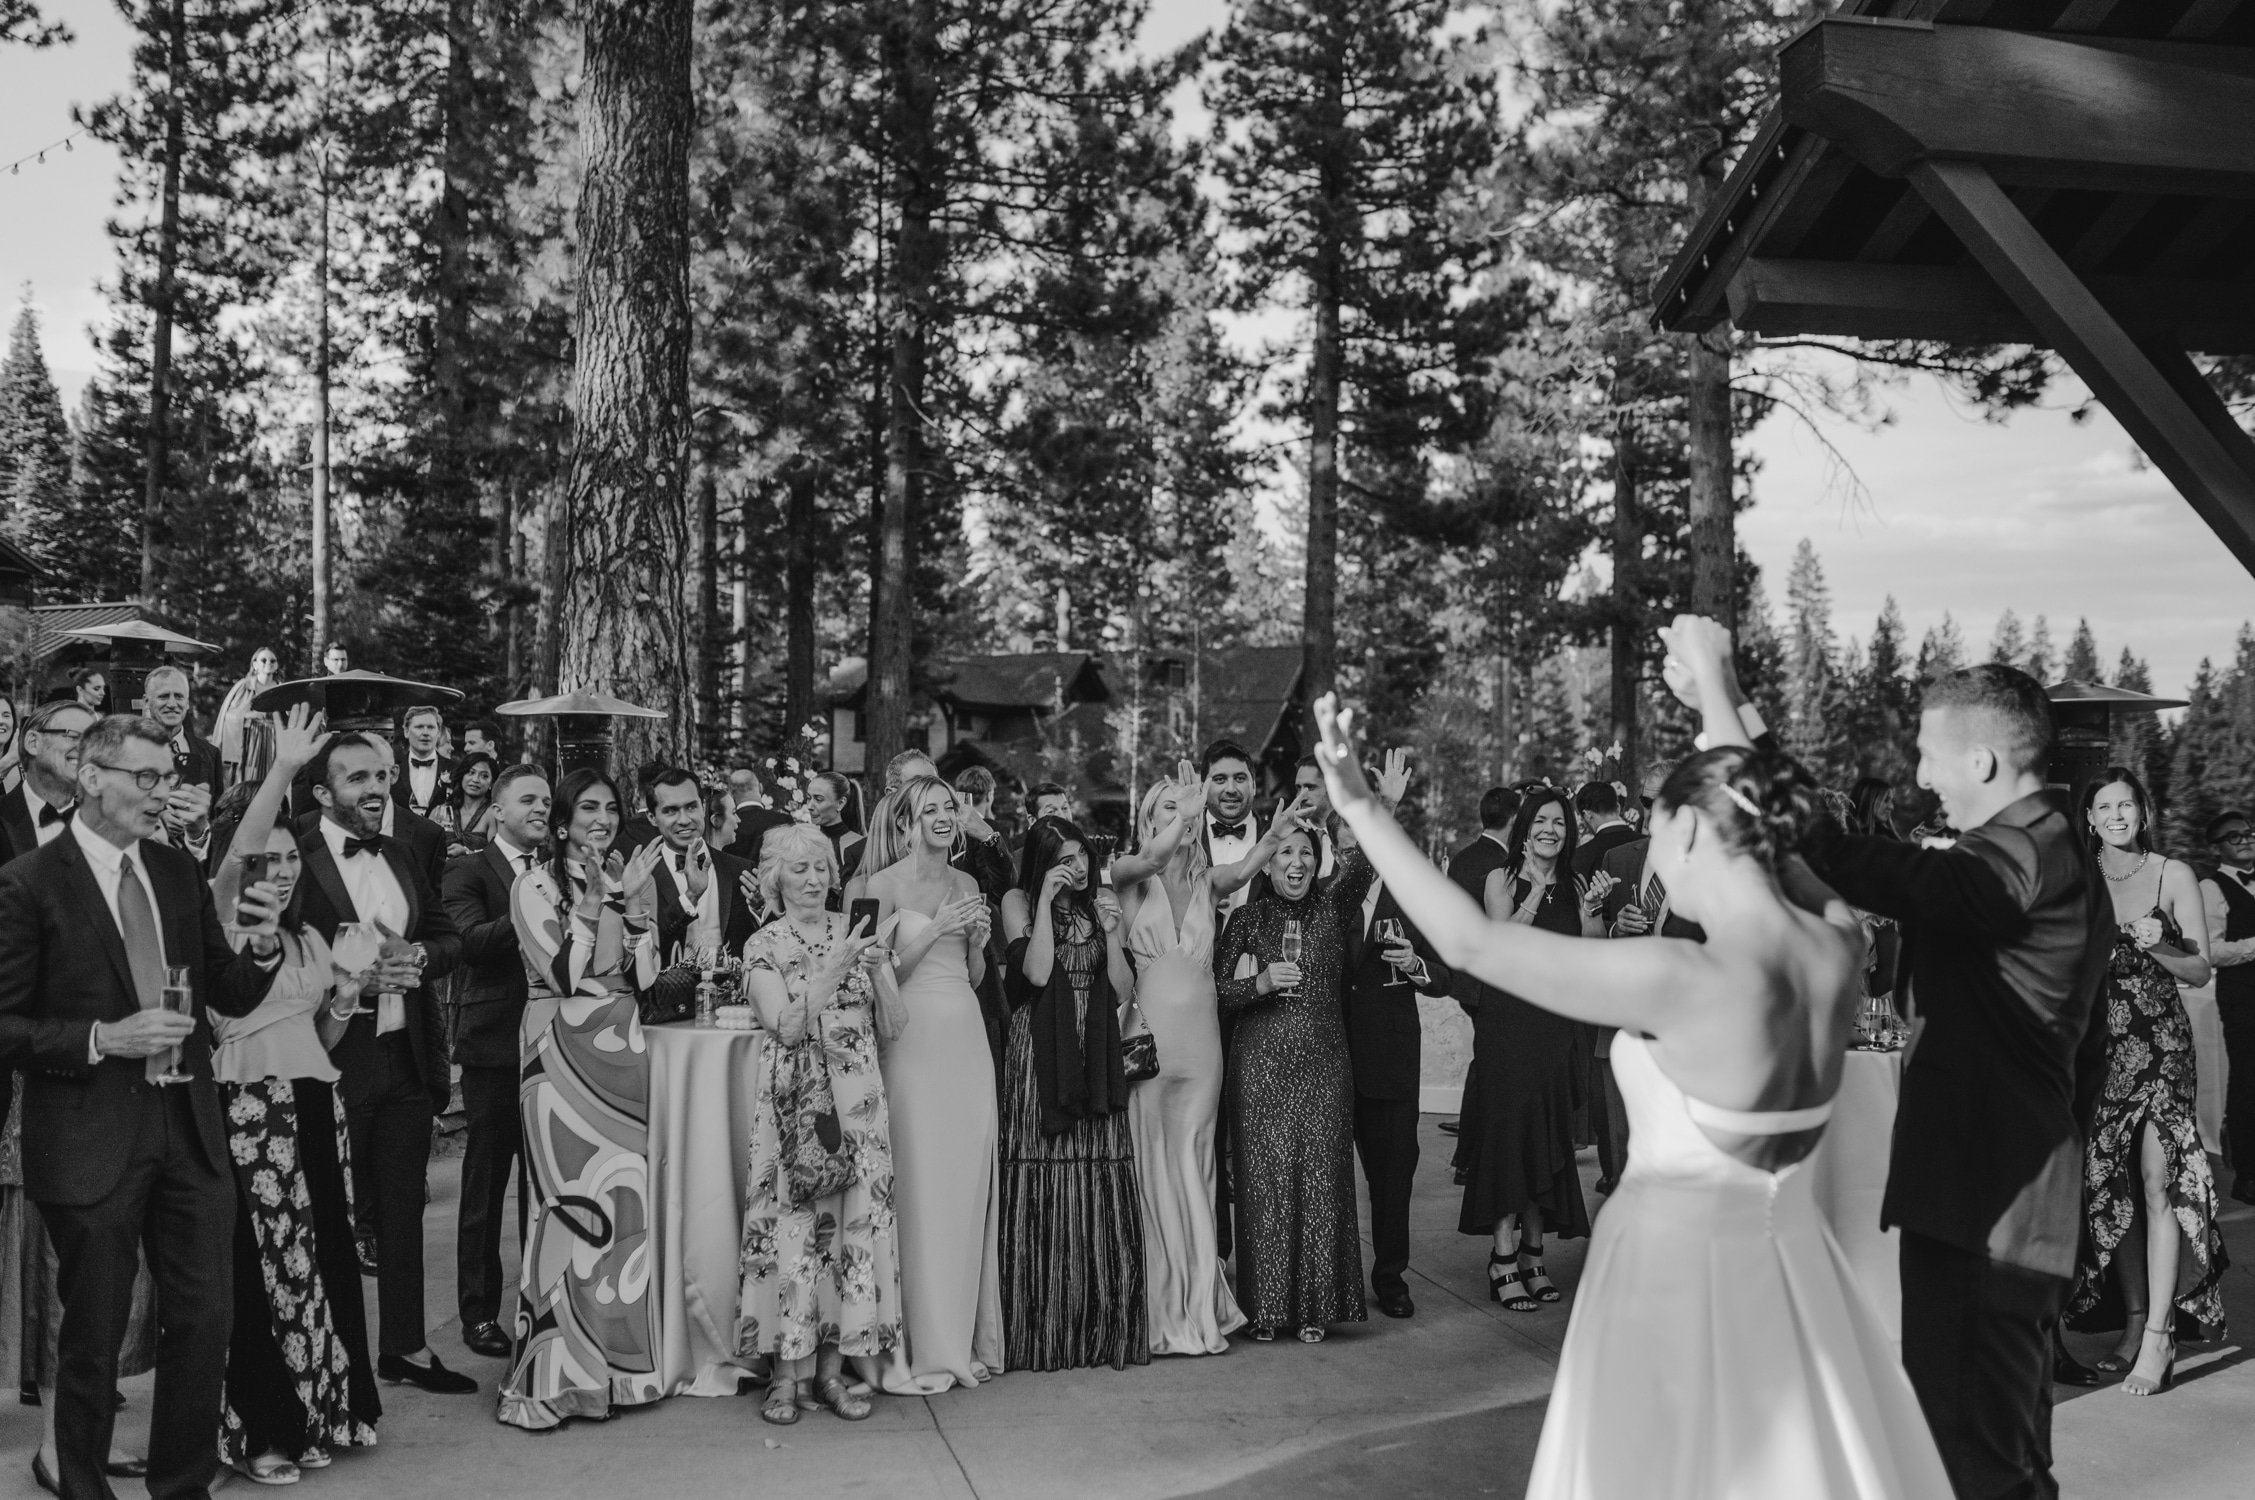 Martis Camp Wedding, photo of the newlywed couple waving and greeting their guests